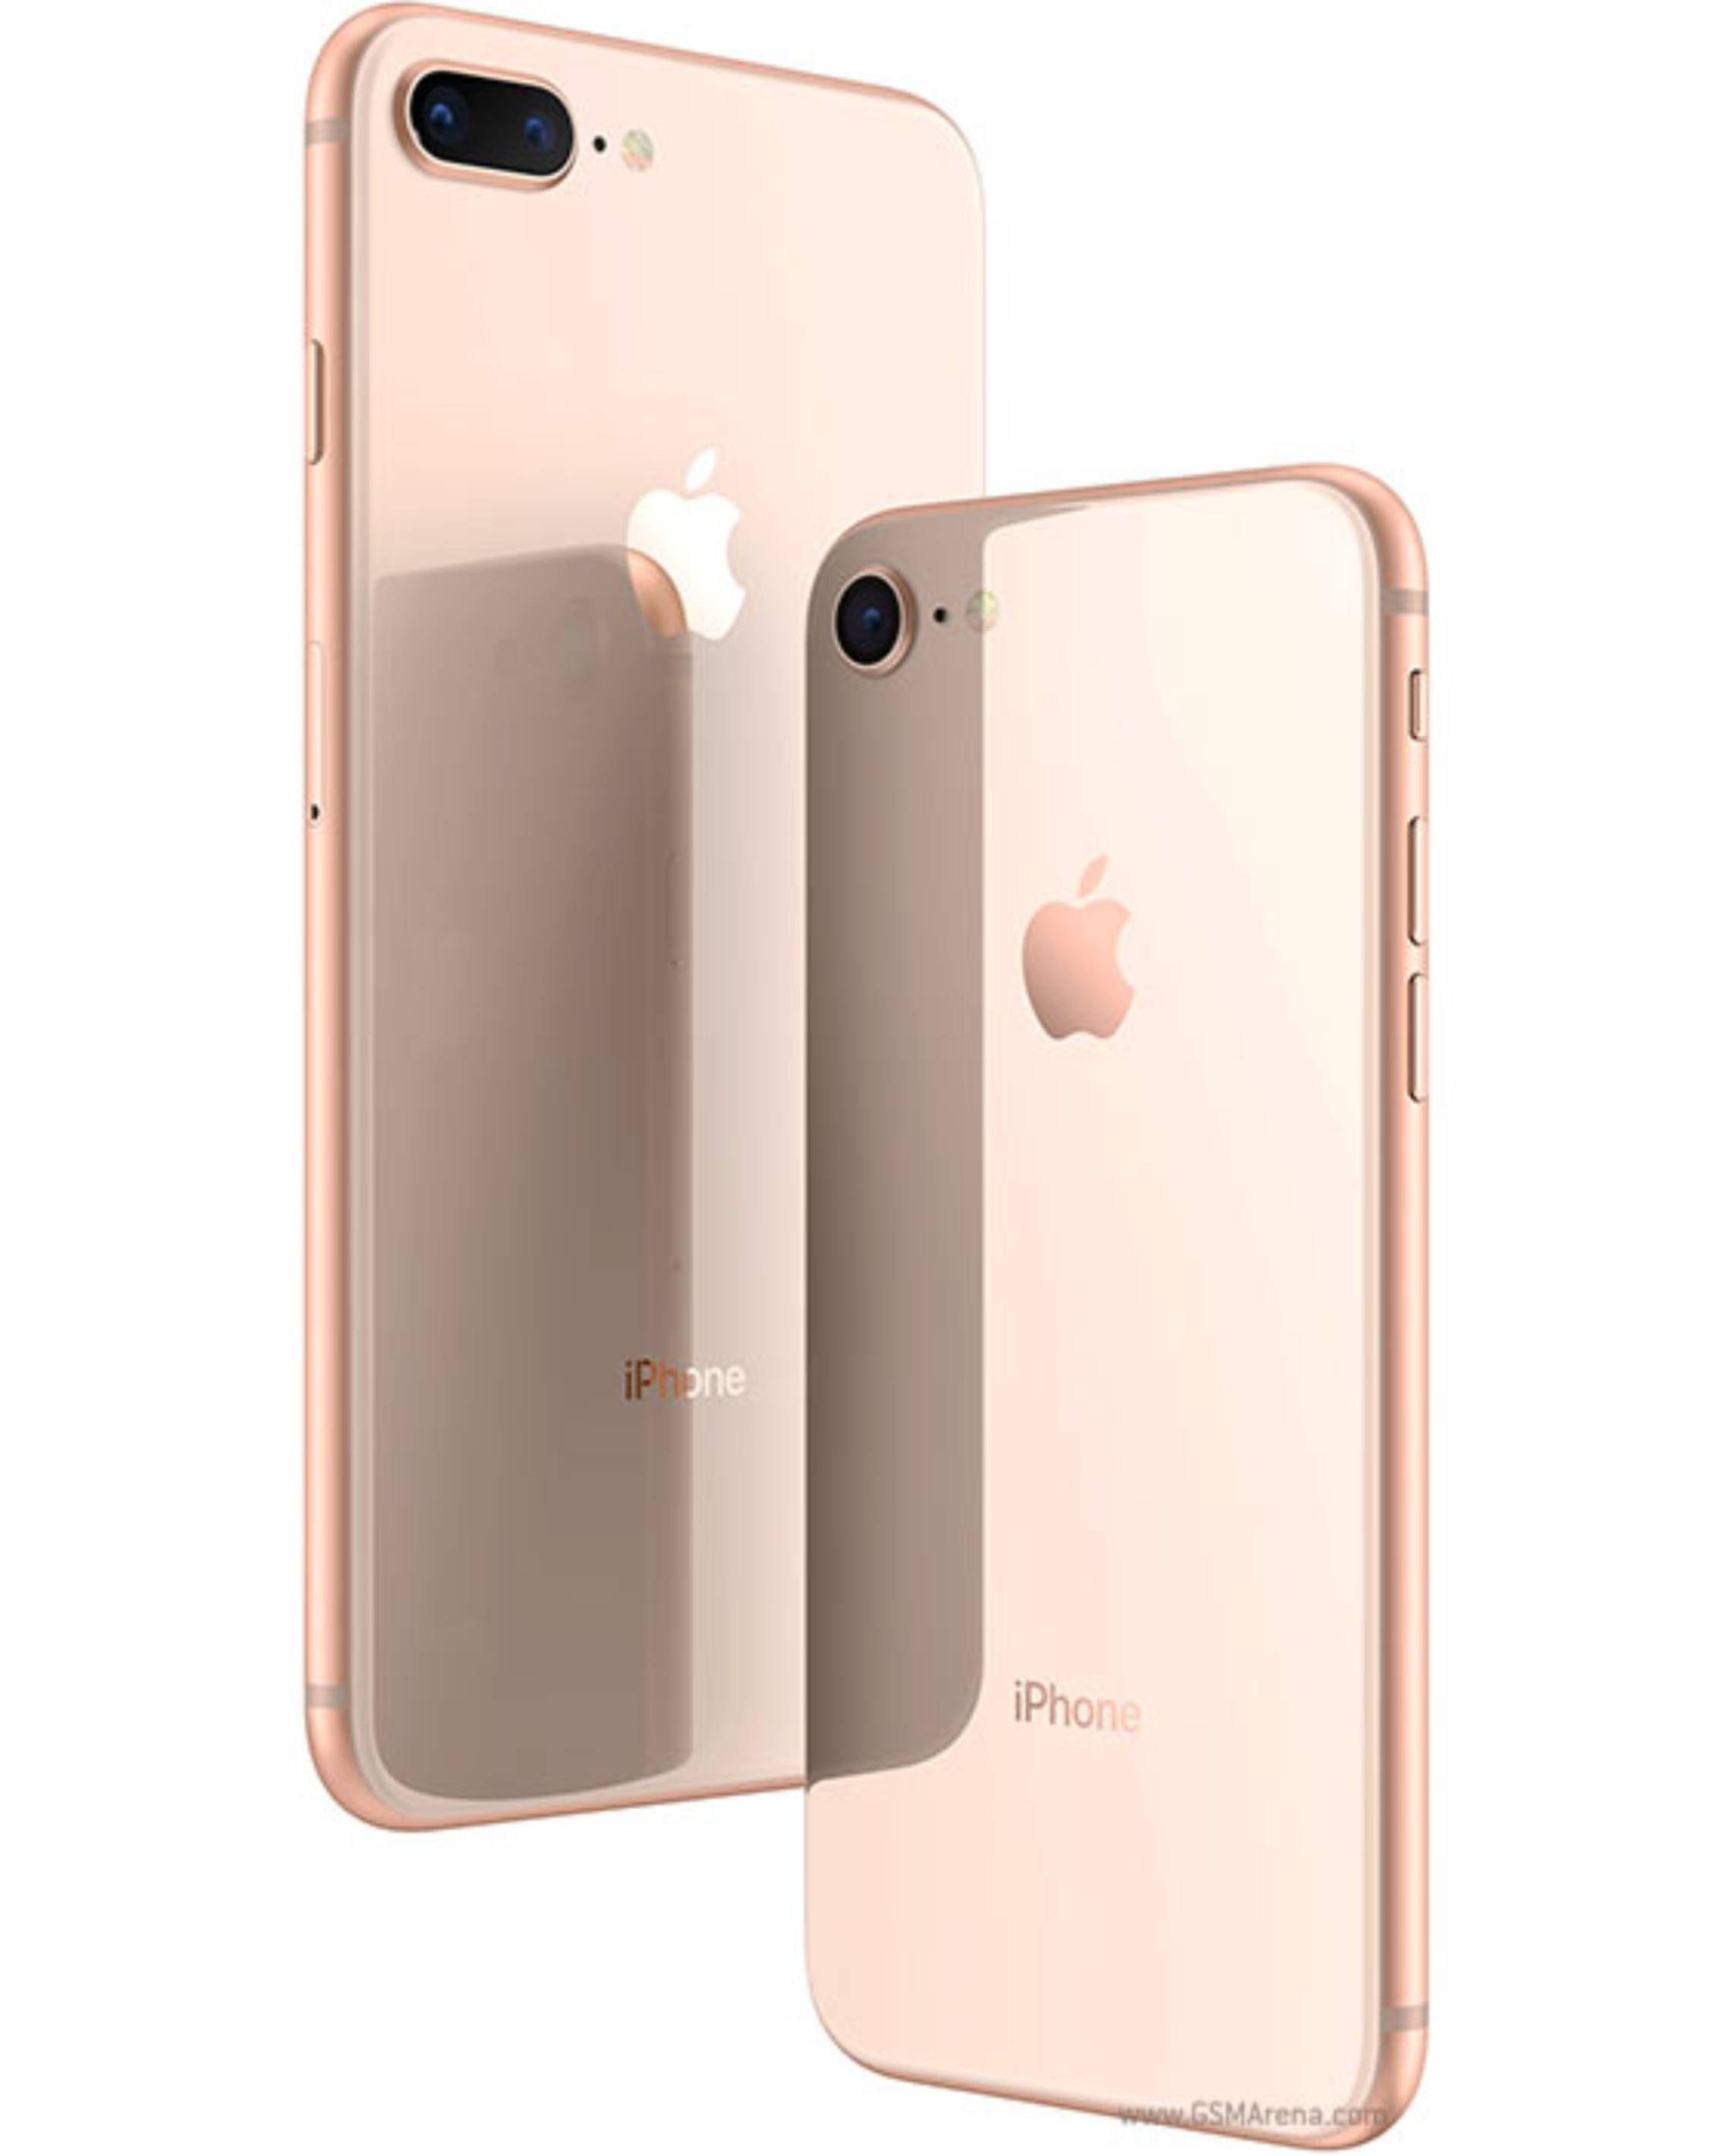 Apple iPhone 8 Specifications and Price in Kenya